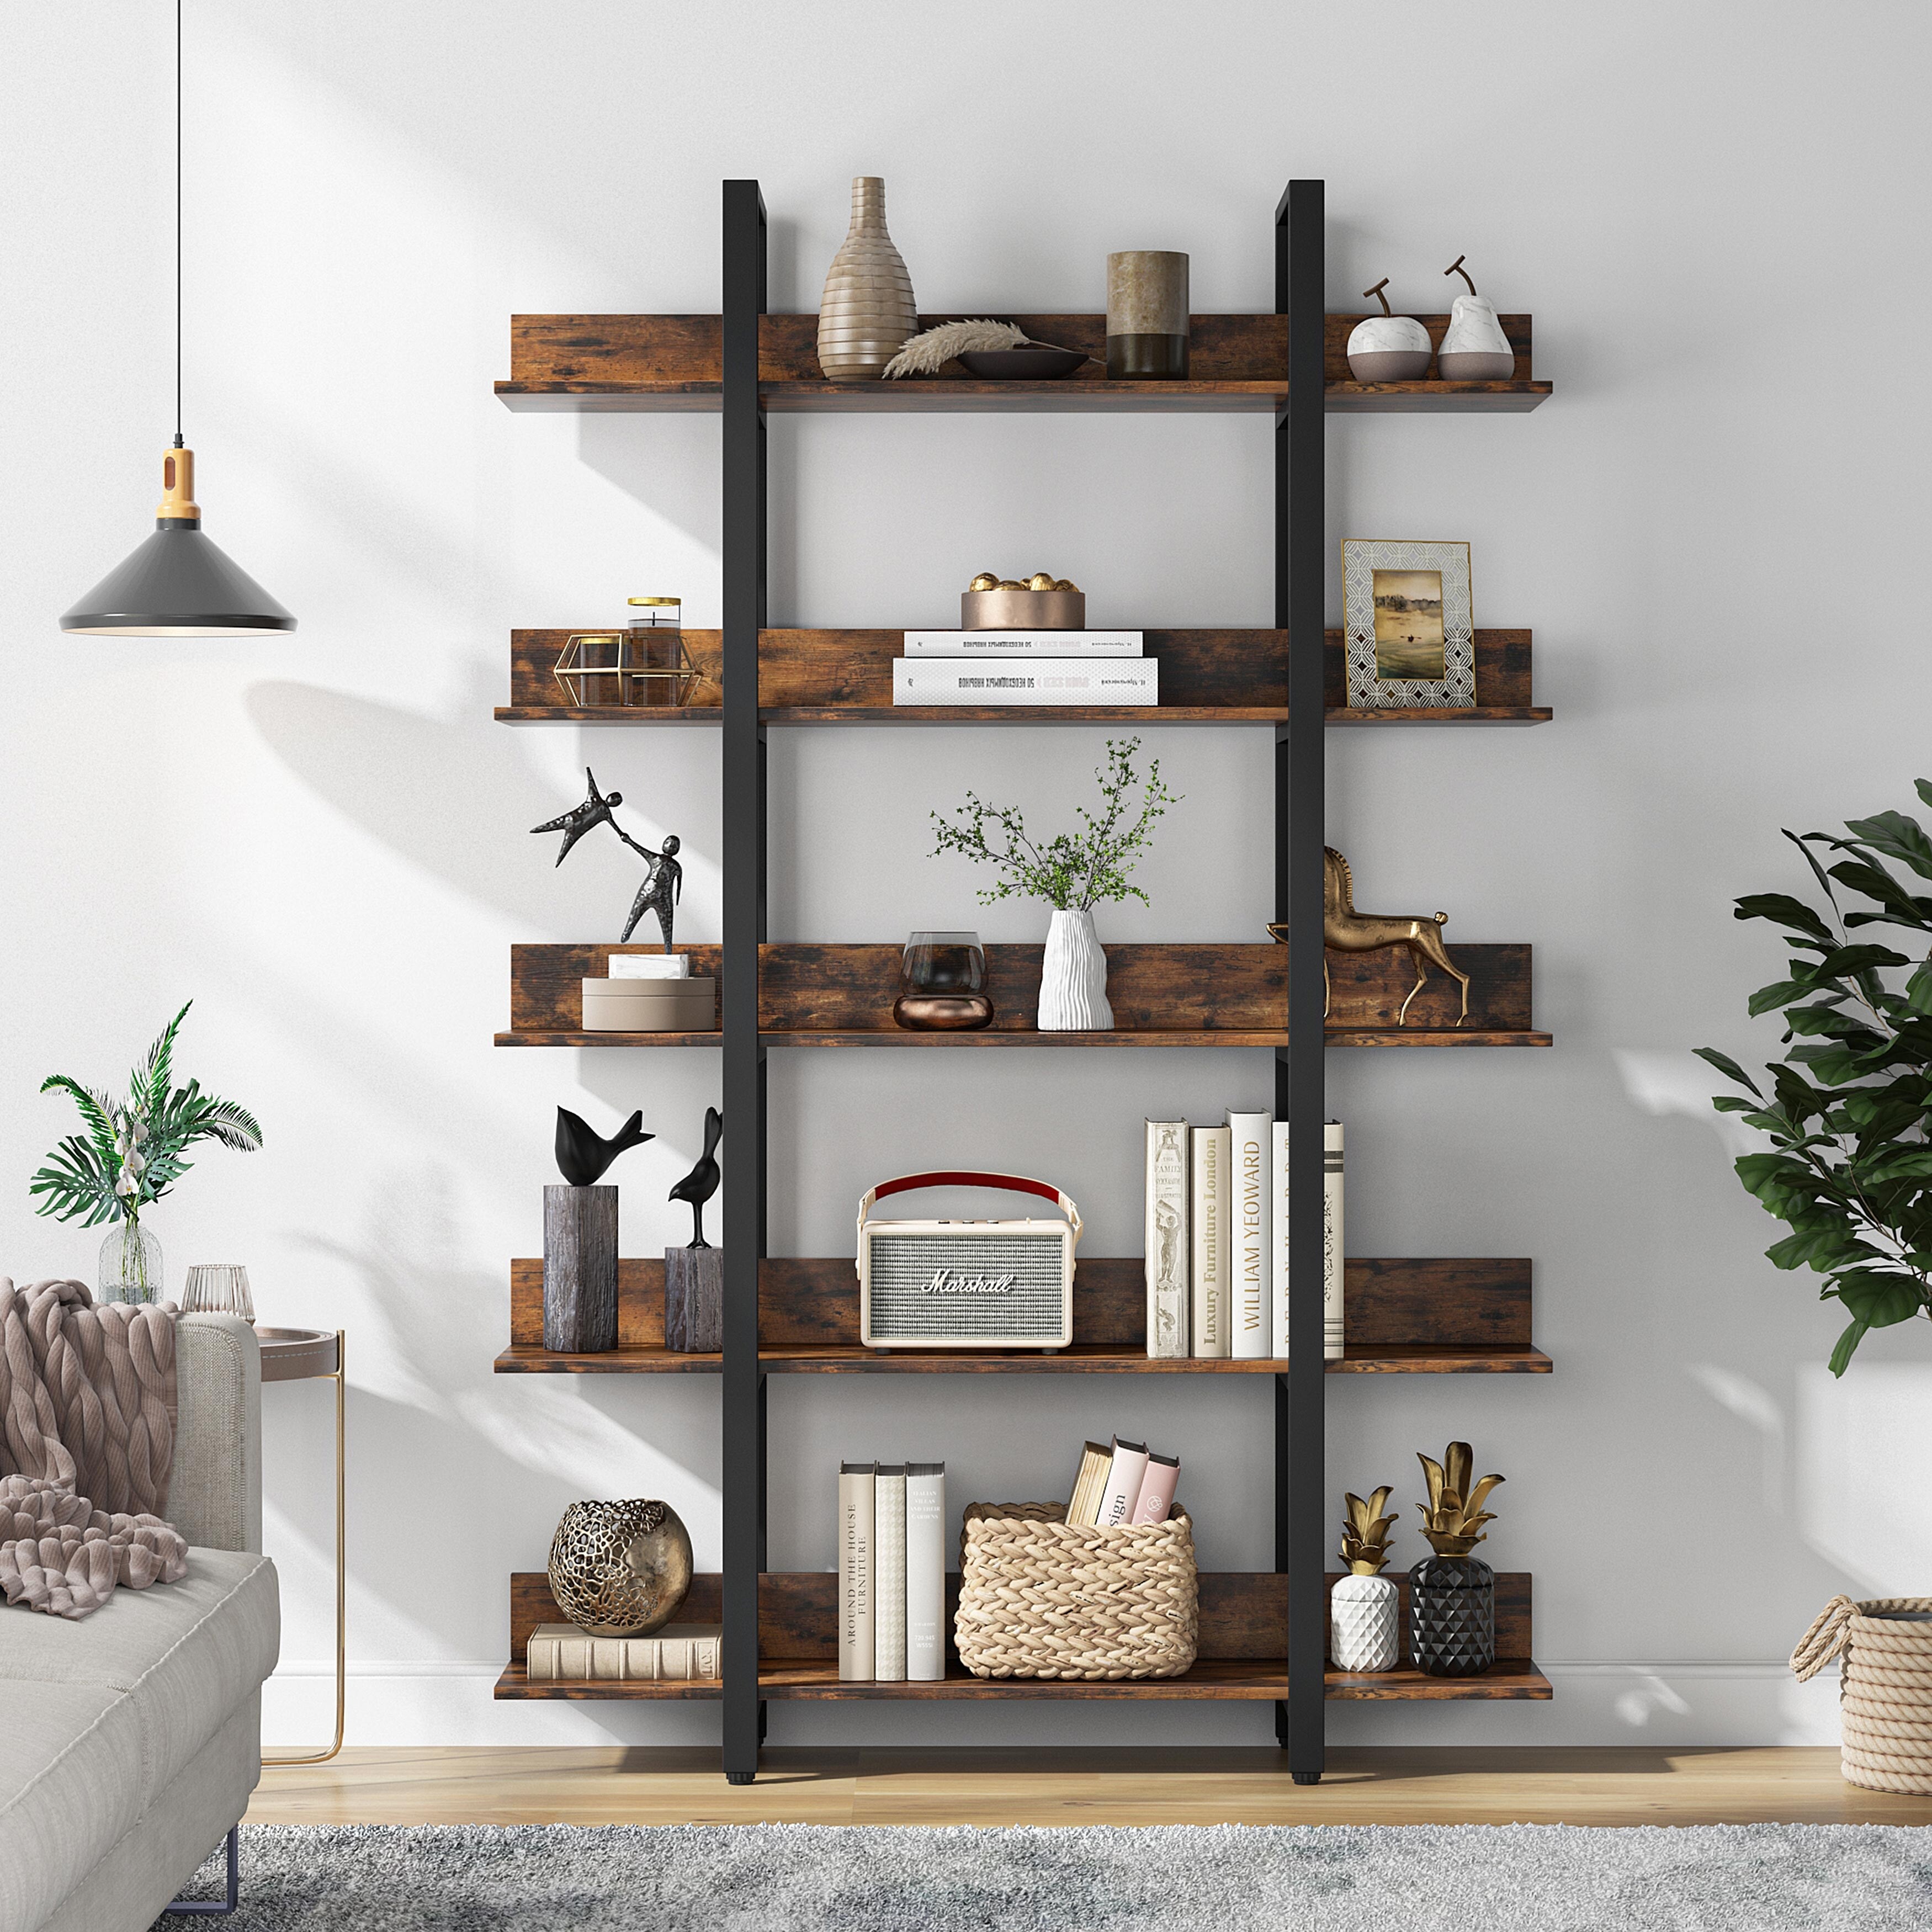 https://ak1.ostkcdn.com/images/products/is/images/direct/b1fdfb68baa2ee77303d856064efafa01263c745/47%27%27-Bookcase%2C-Industrial-Bookshelves-Etagere-with-Storage%2C-Open-Display-Shelves.jpg